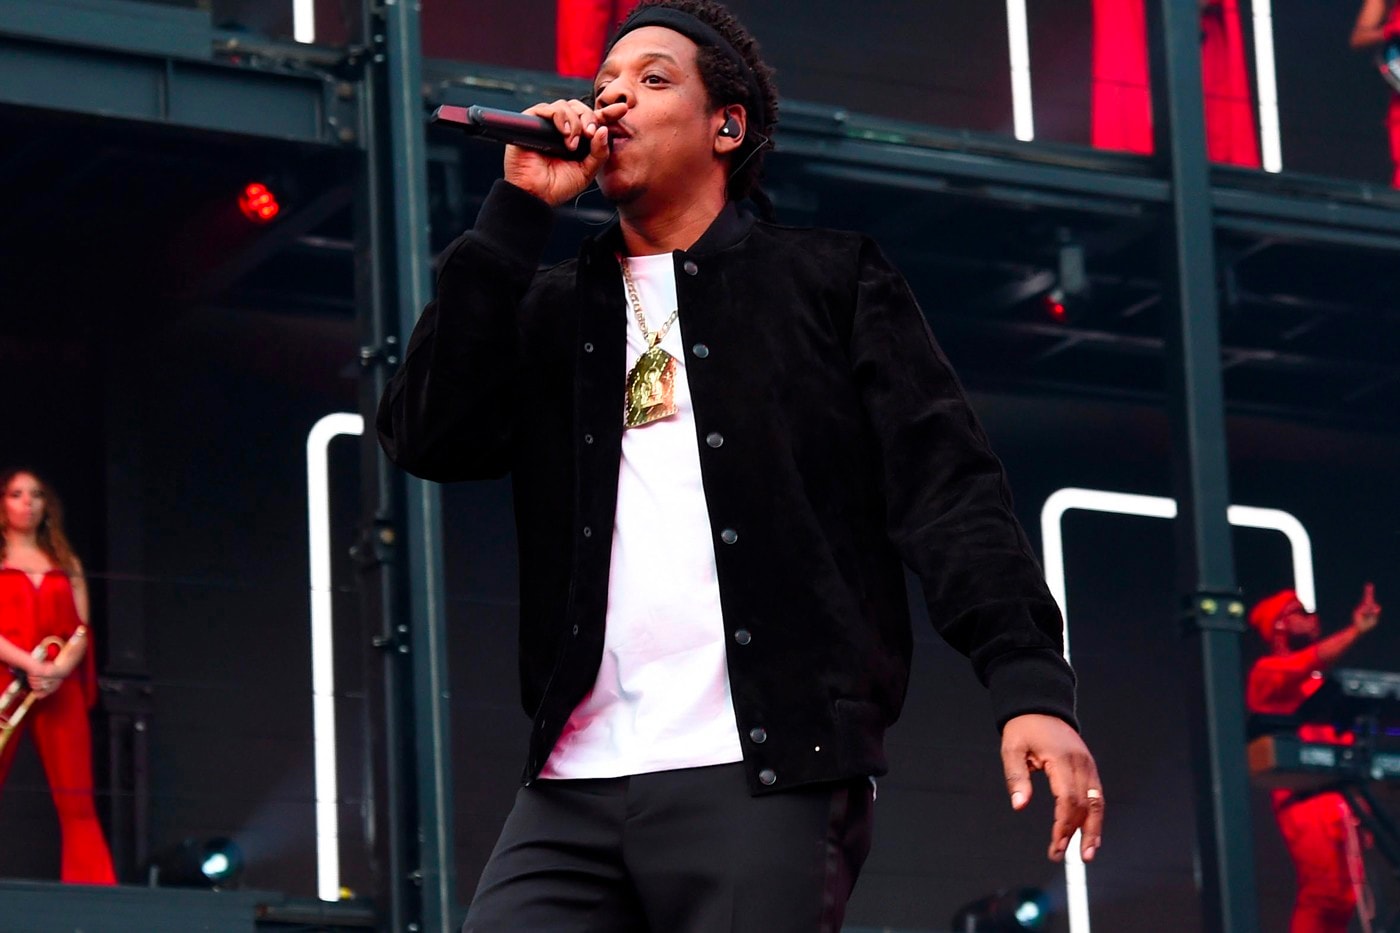 JAY Z Holds Record Most Grammy Nominations 80 beyonce jay electronica the weeknd 